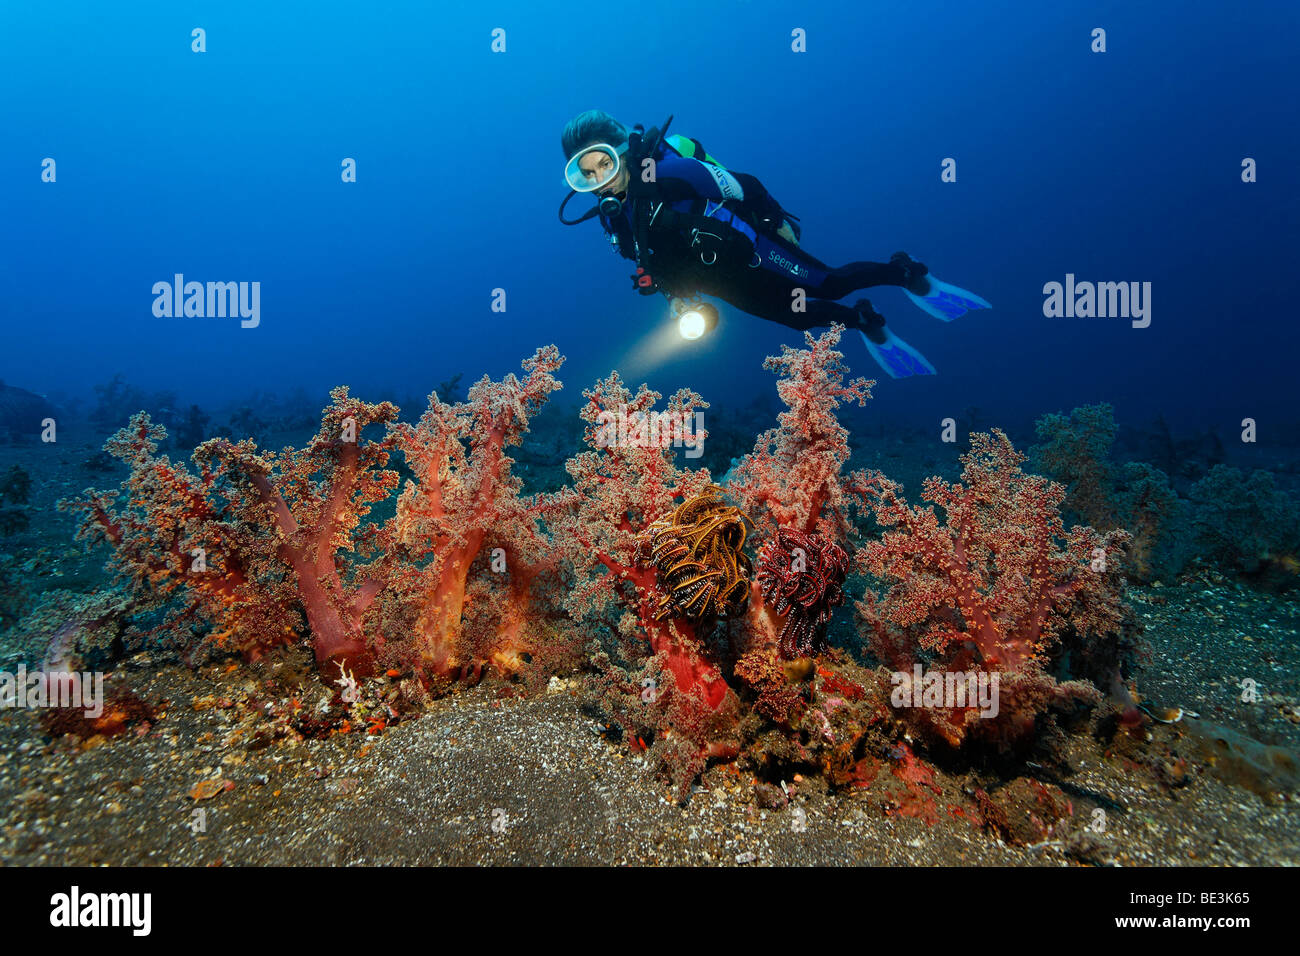 Diver looking at a row of magnificent soft corals, Kuda, Bali, Indonesia, Pacific Ocean Stock Photo